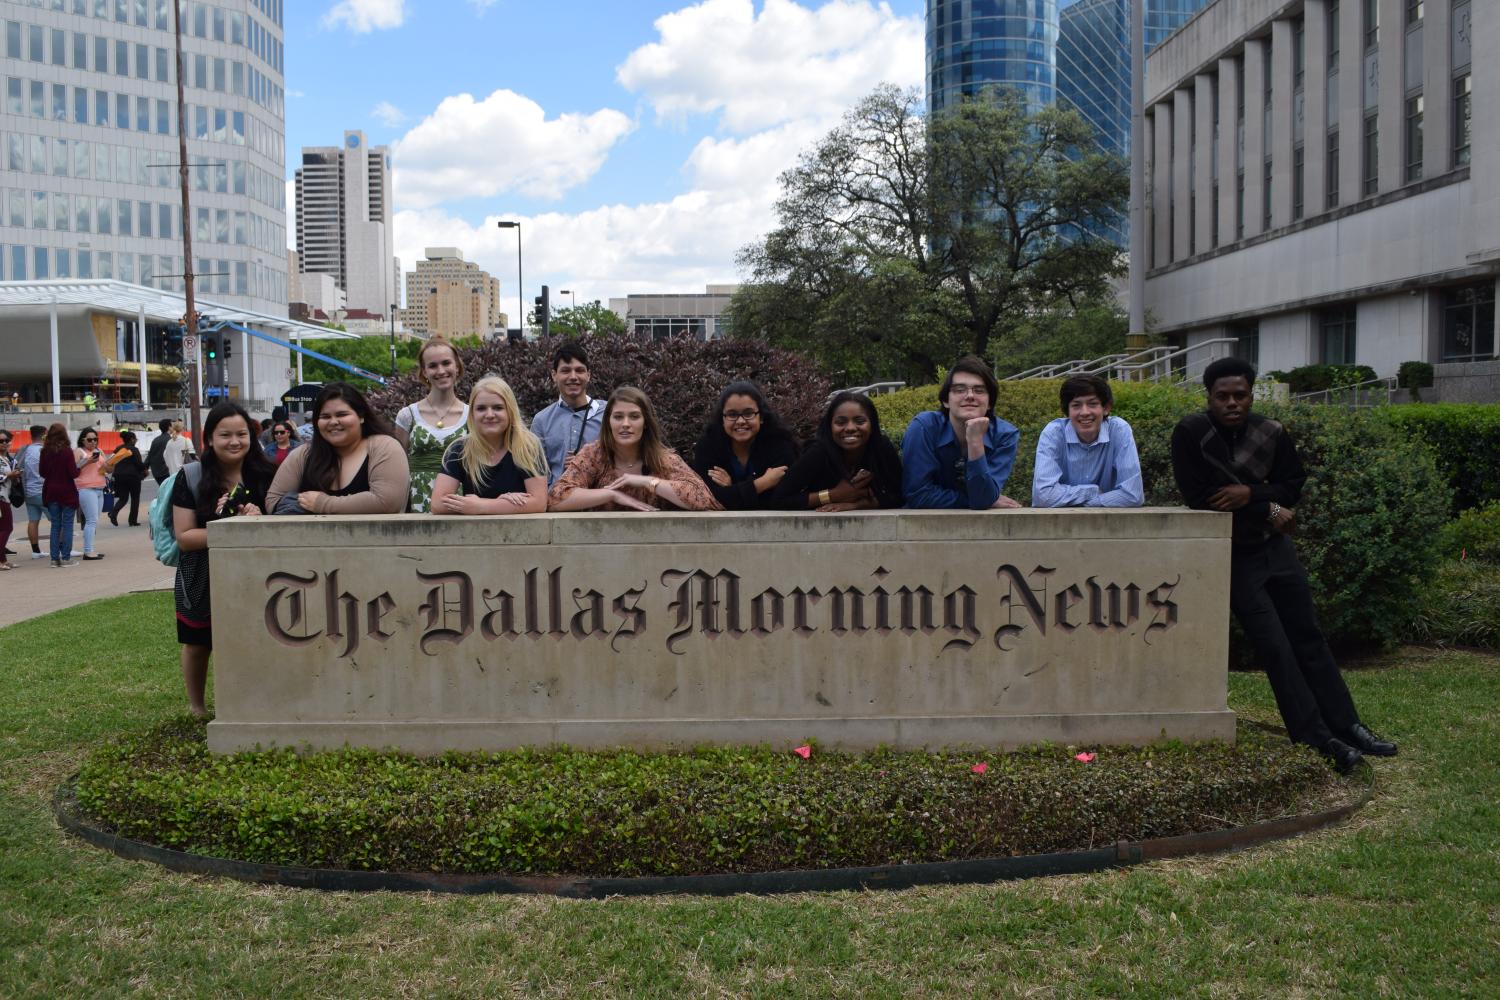 Learning with the pros \\ The newspaper staff visited Dallas Morning News for their annual journalism day. Students attended workshops on design, writing, photography, etc.